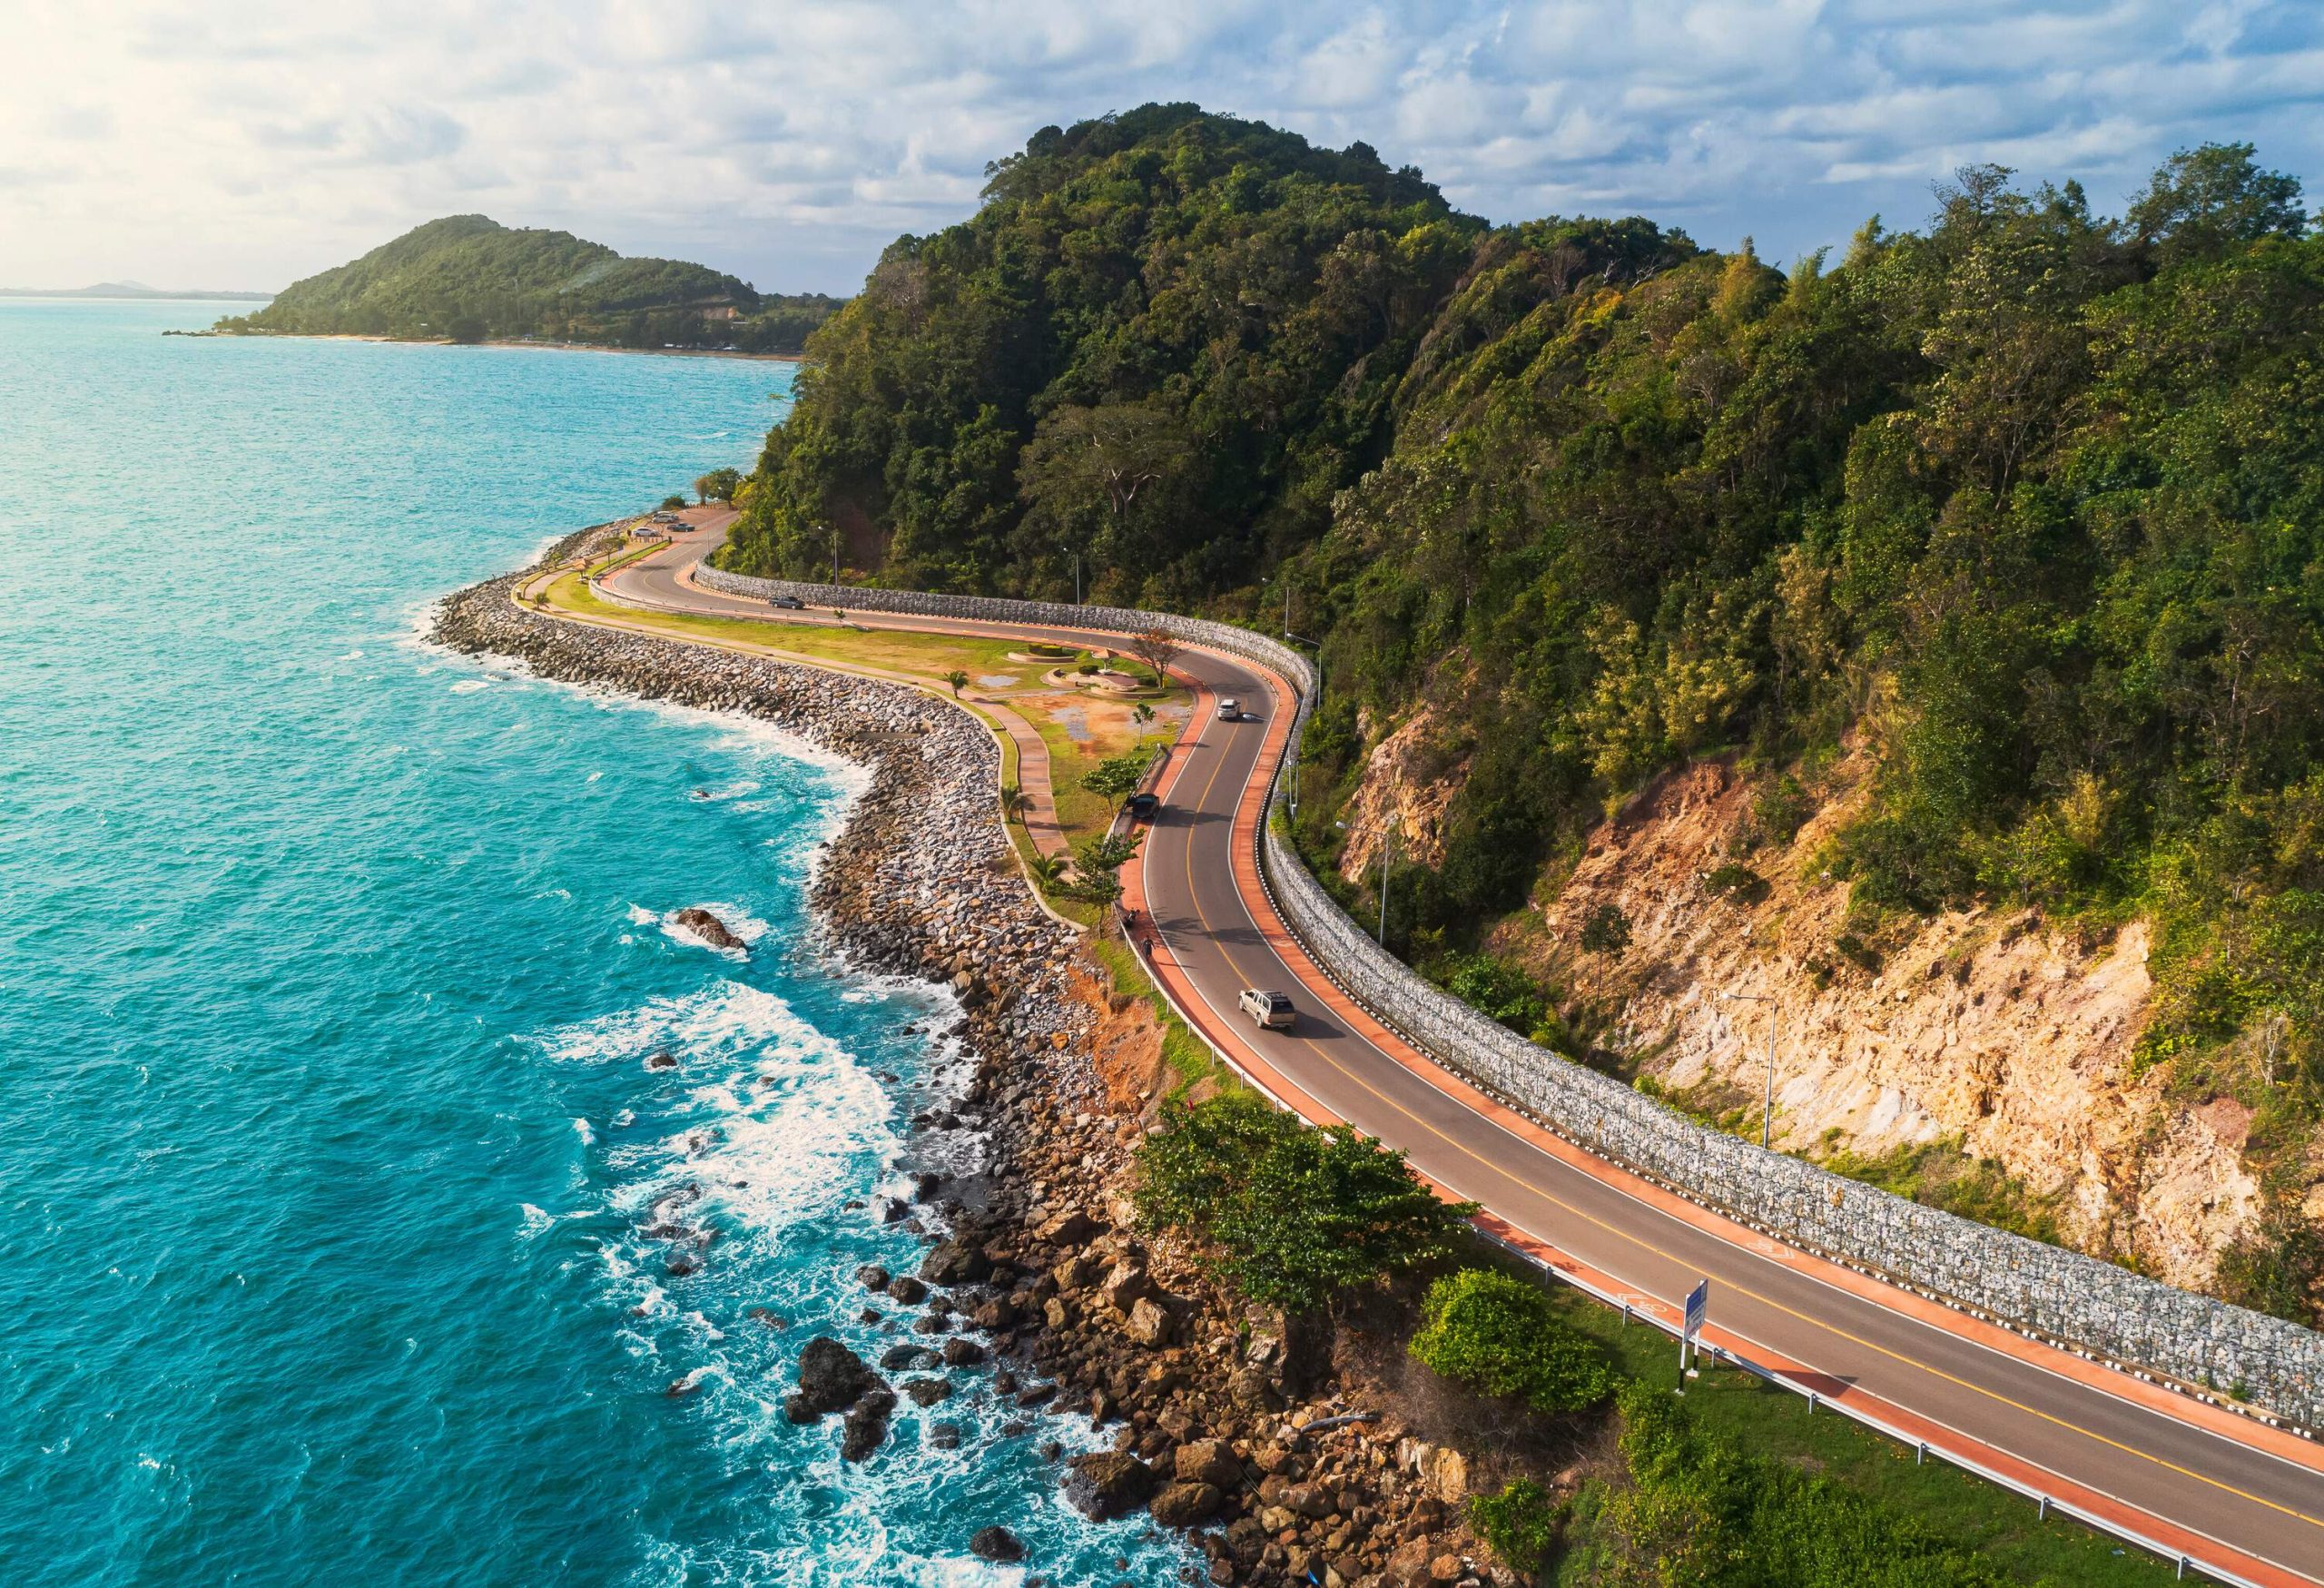 Cars travelling on a coastal road along the forested cliffs with vast ocean views.